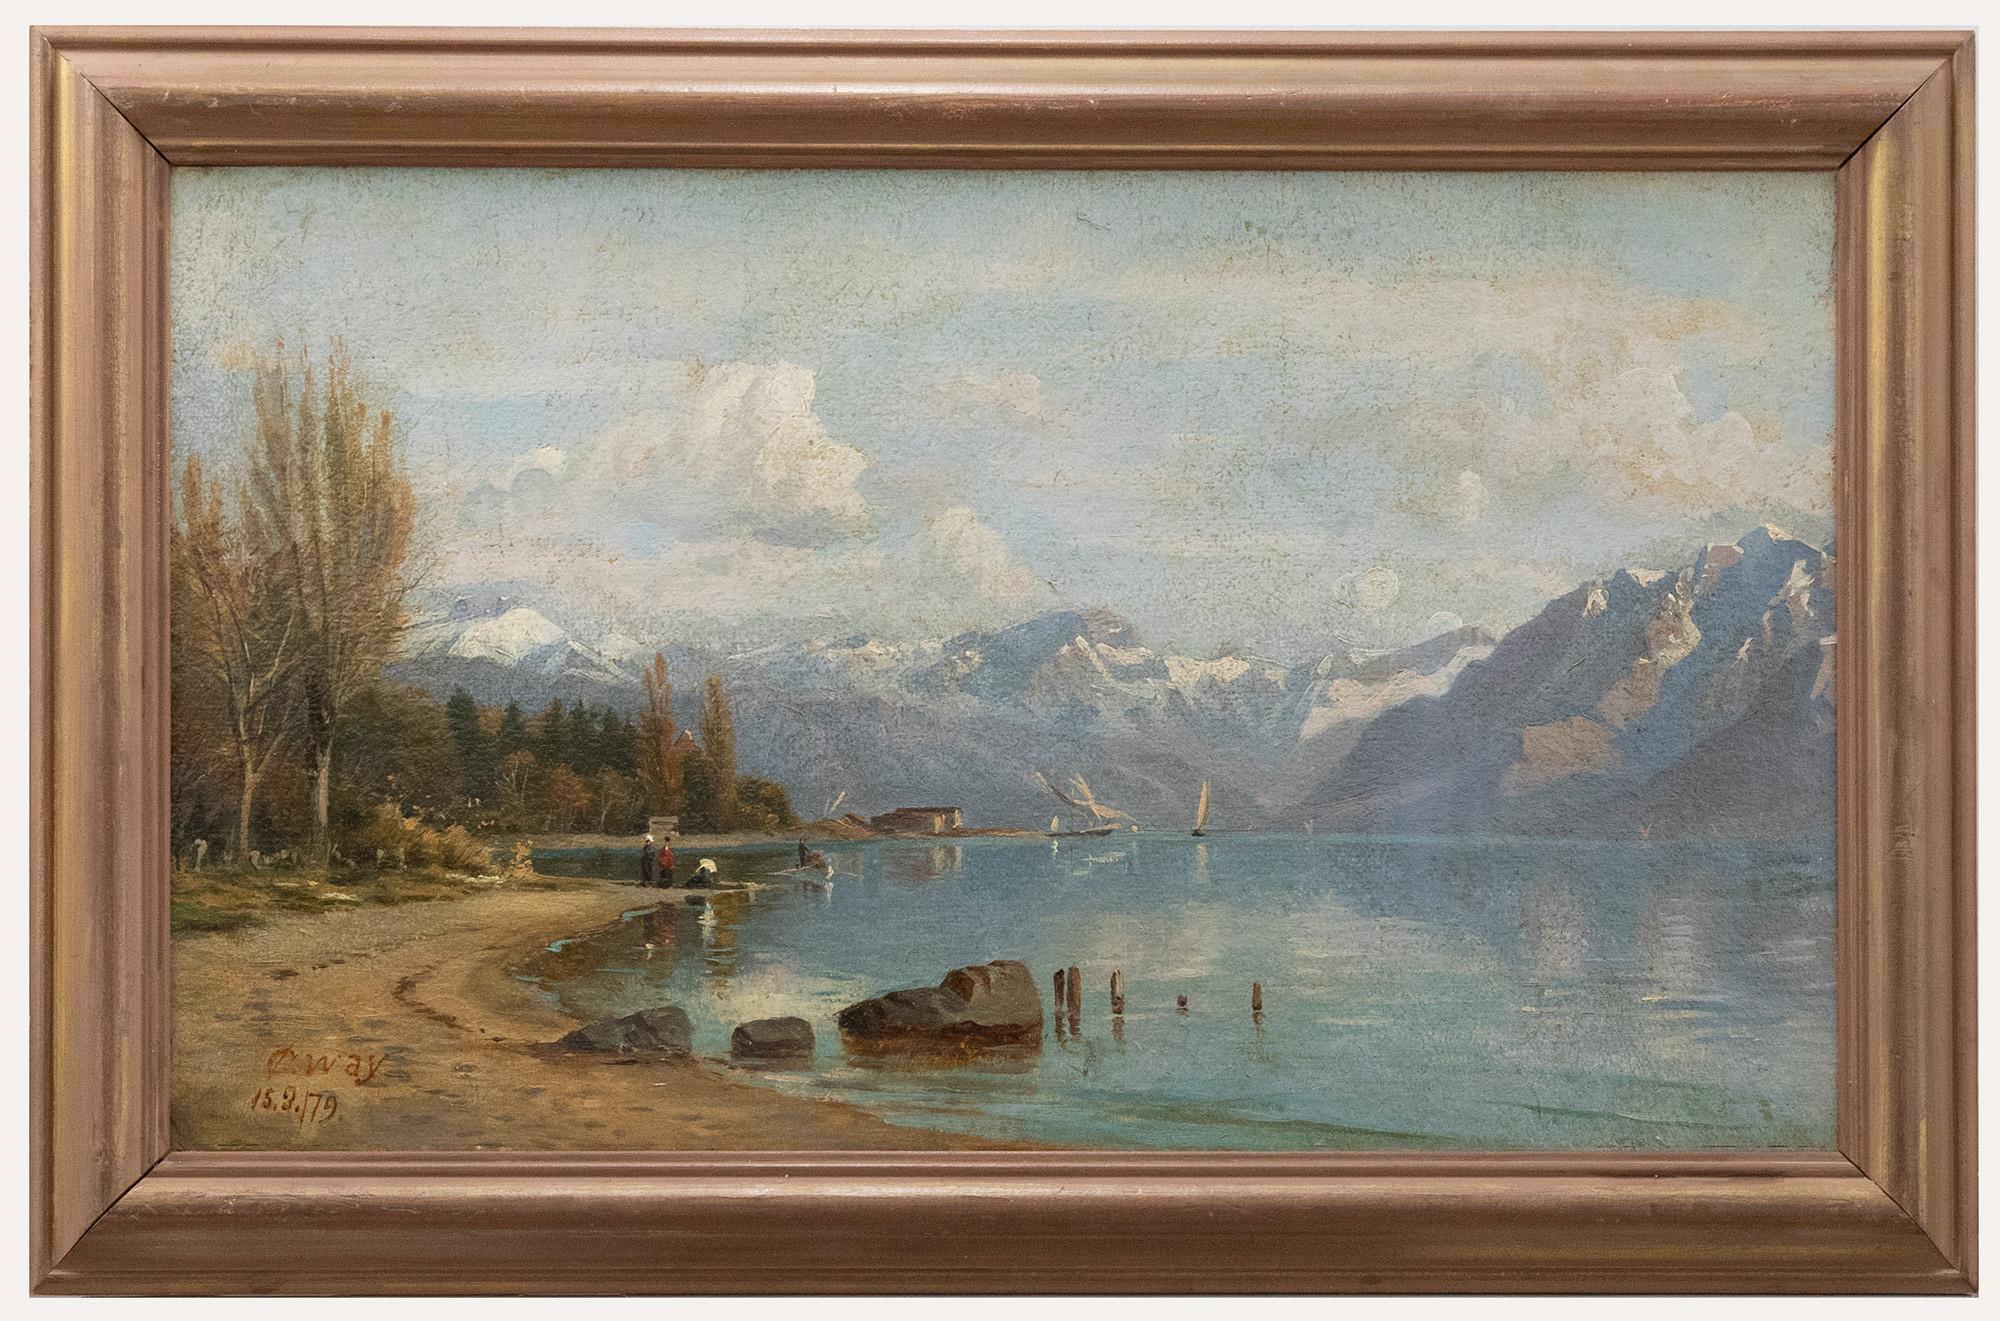 Unknown Landscape Painting - Follower of Charles Jones Way (1834-1919) - Framed Oil, Lake Lucerne